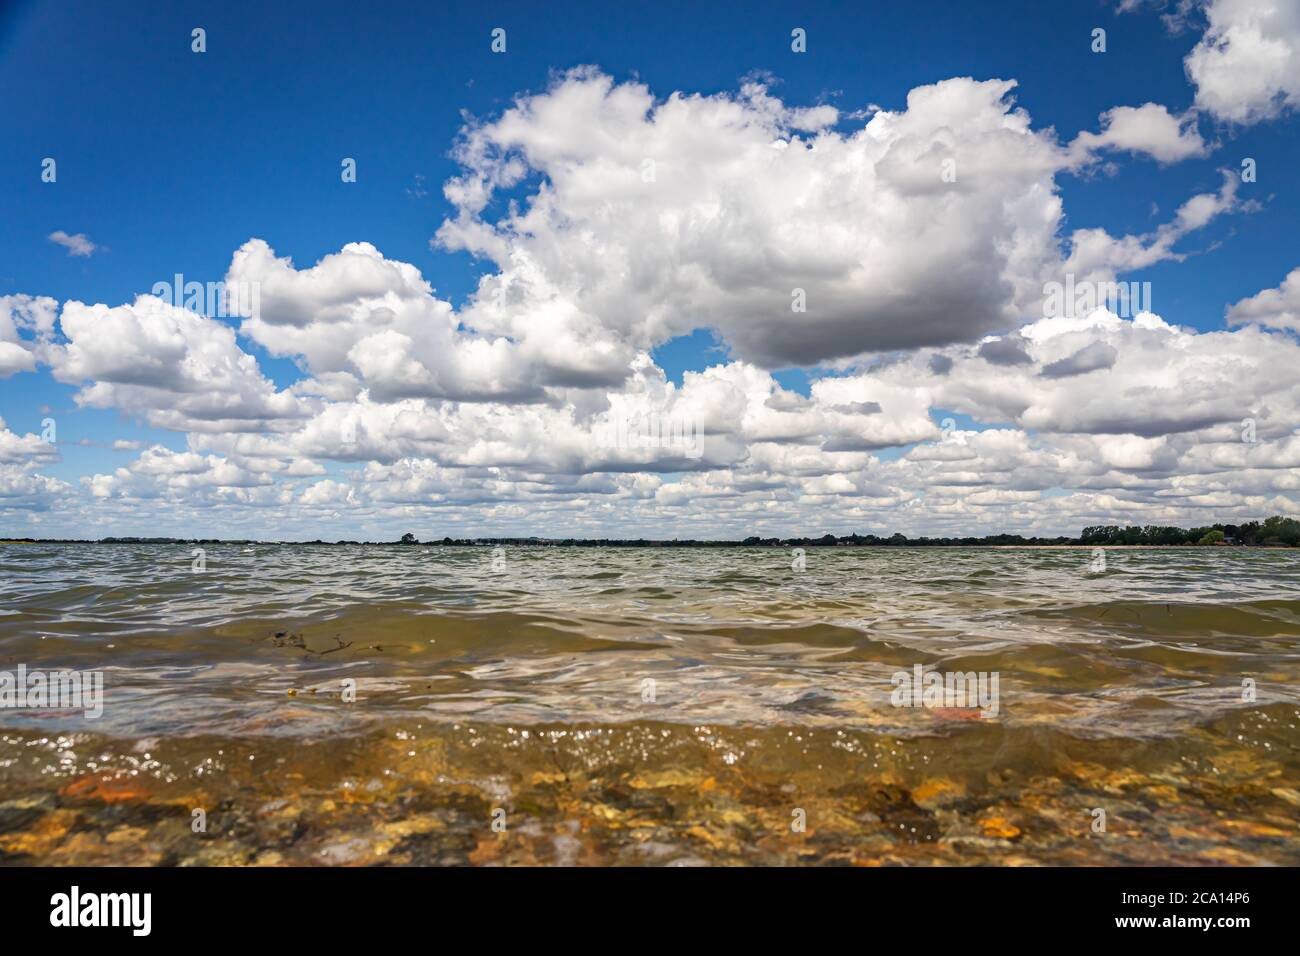 Gentle waves lapping the sea shore Stock Photo